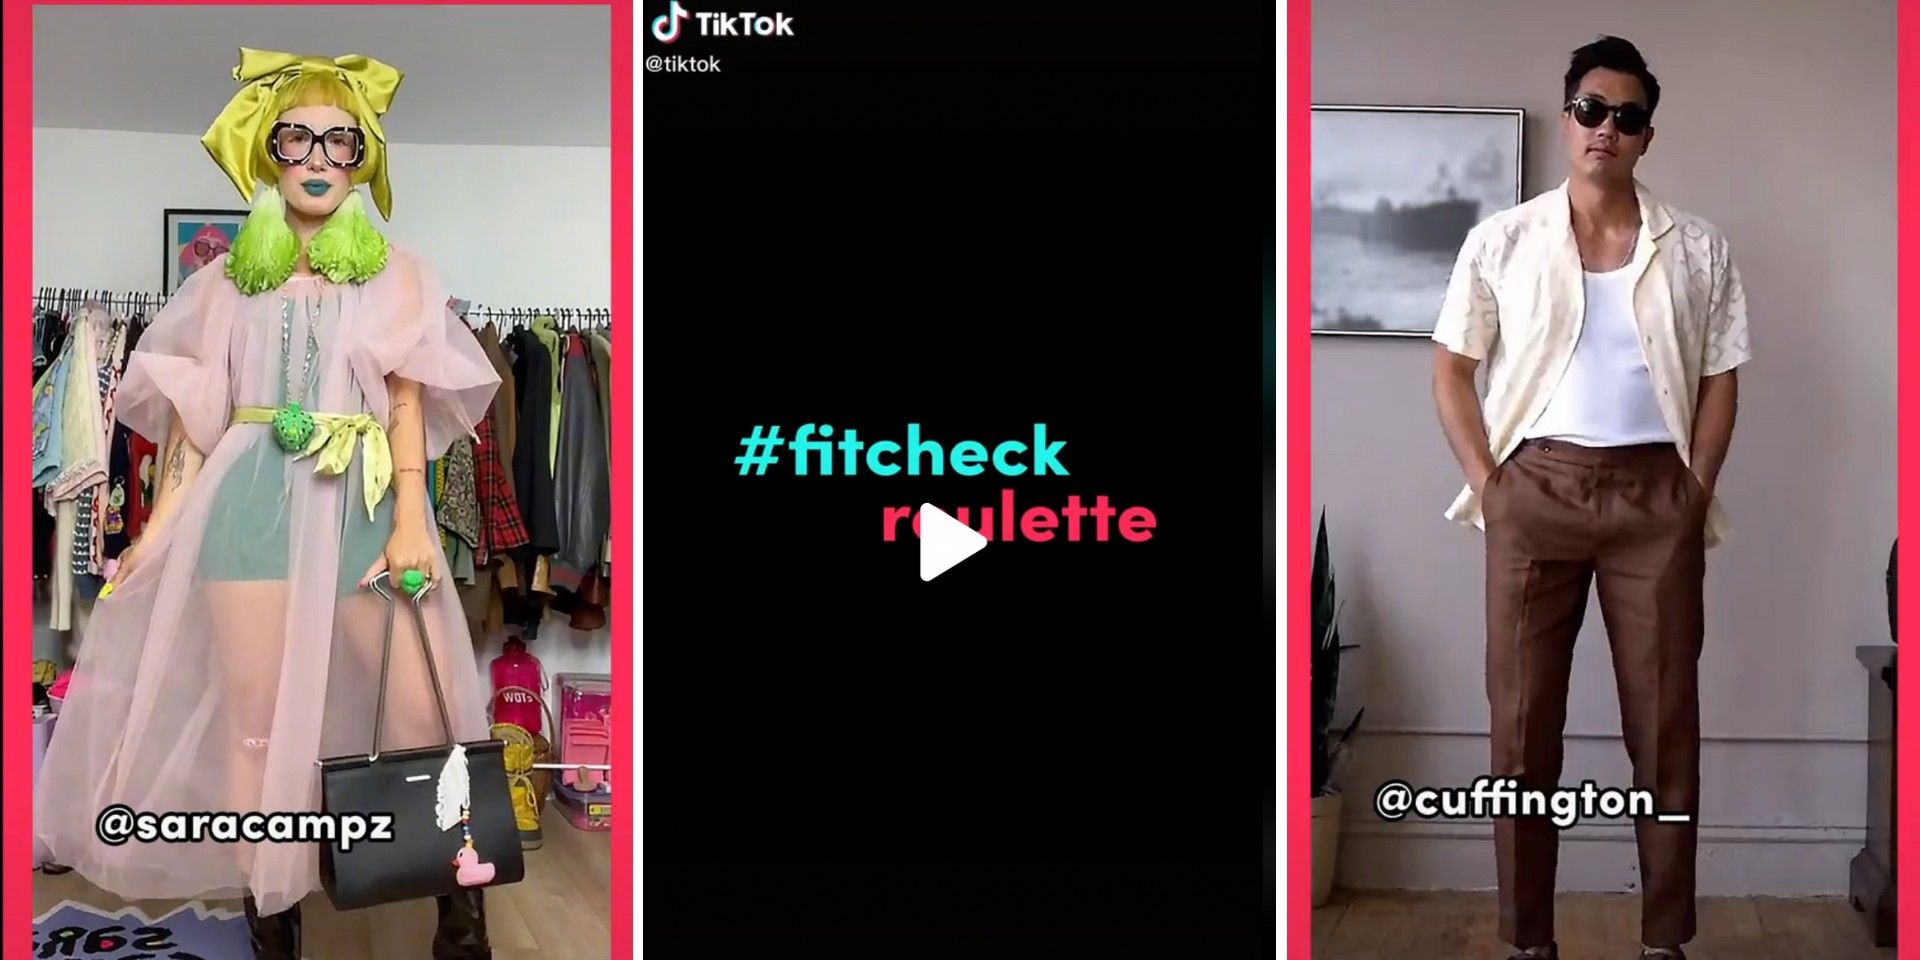 TikTok’s New Fashion Hashtag: How Can You Participate?